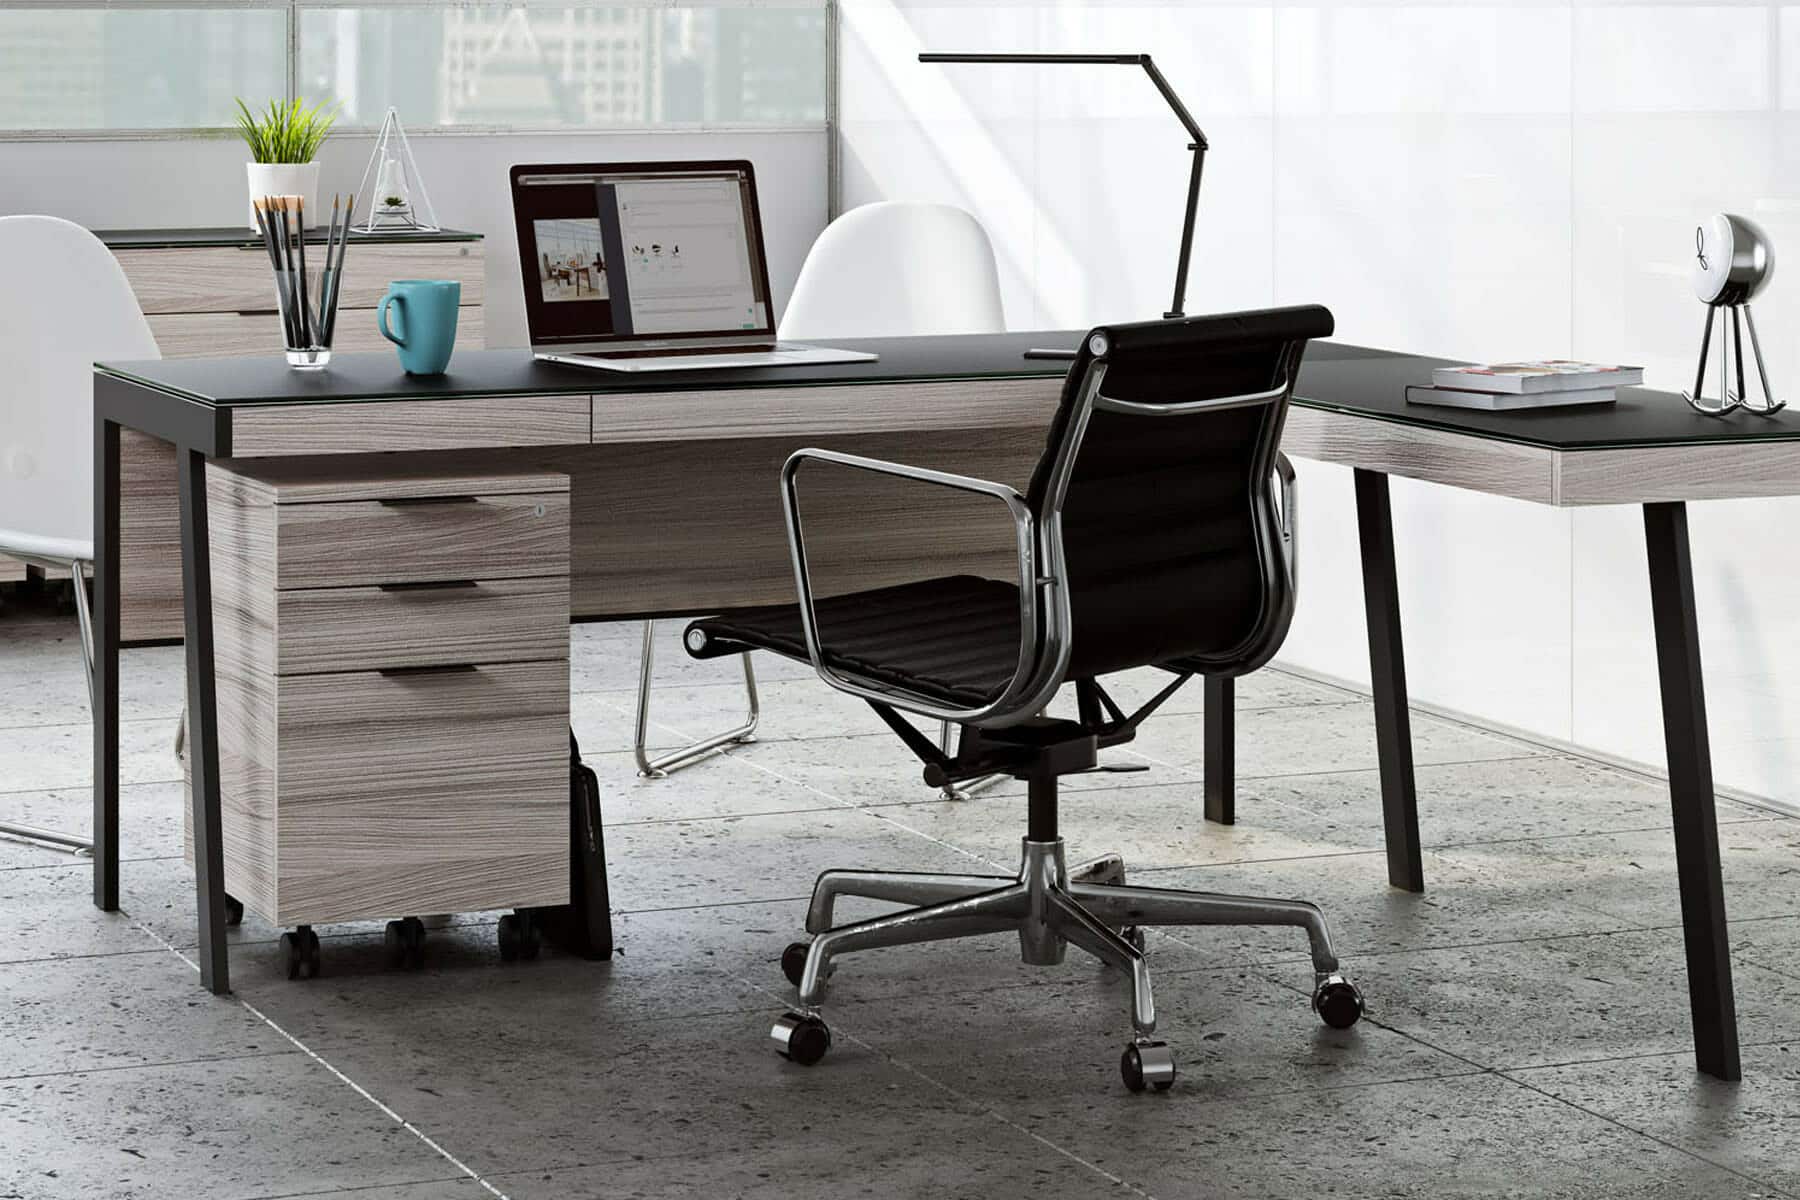 5 Things to Consider When Buying a Modern Office Desk